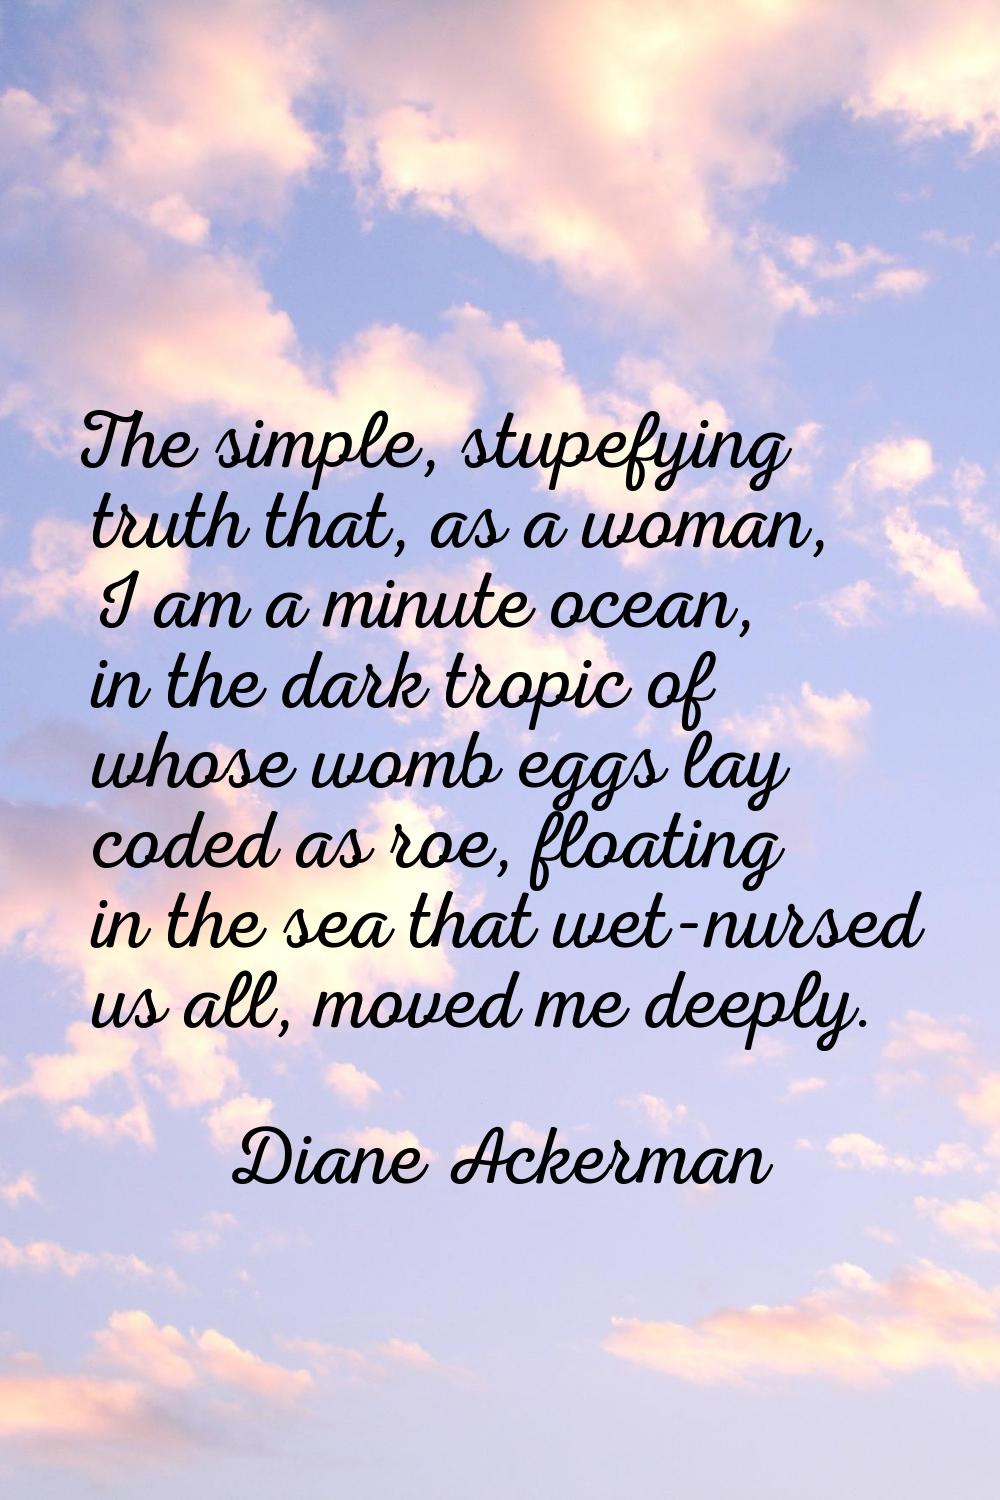 The simple, stupefying truth that, as a woman, I am a minute ocean, in the dark tropic of whose wom